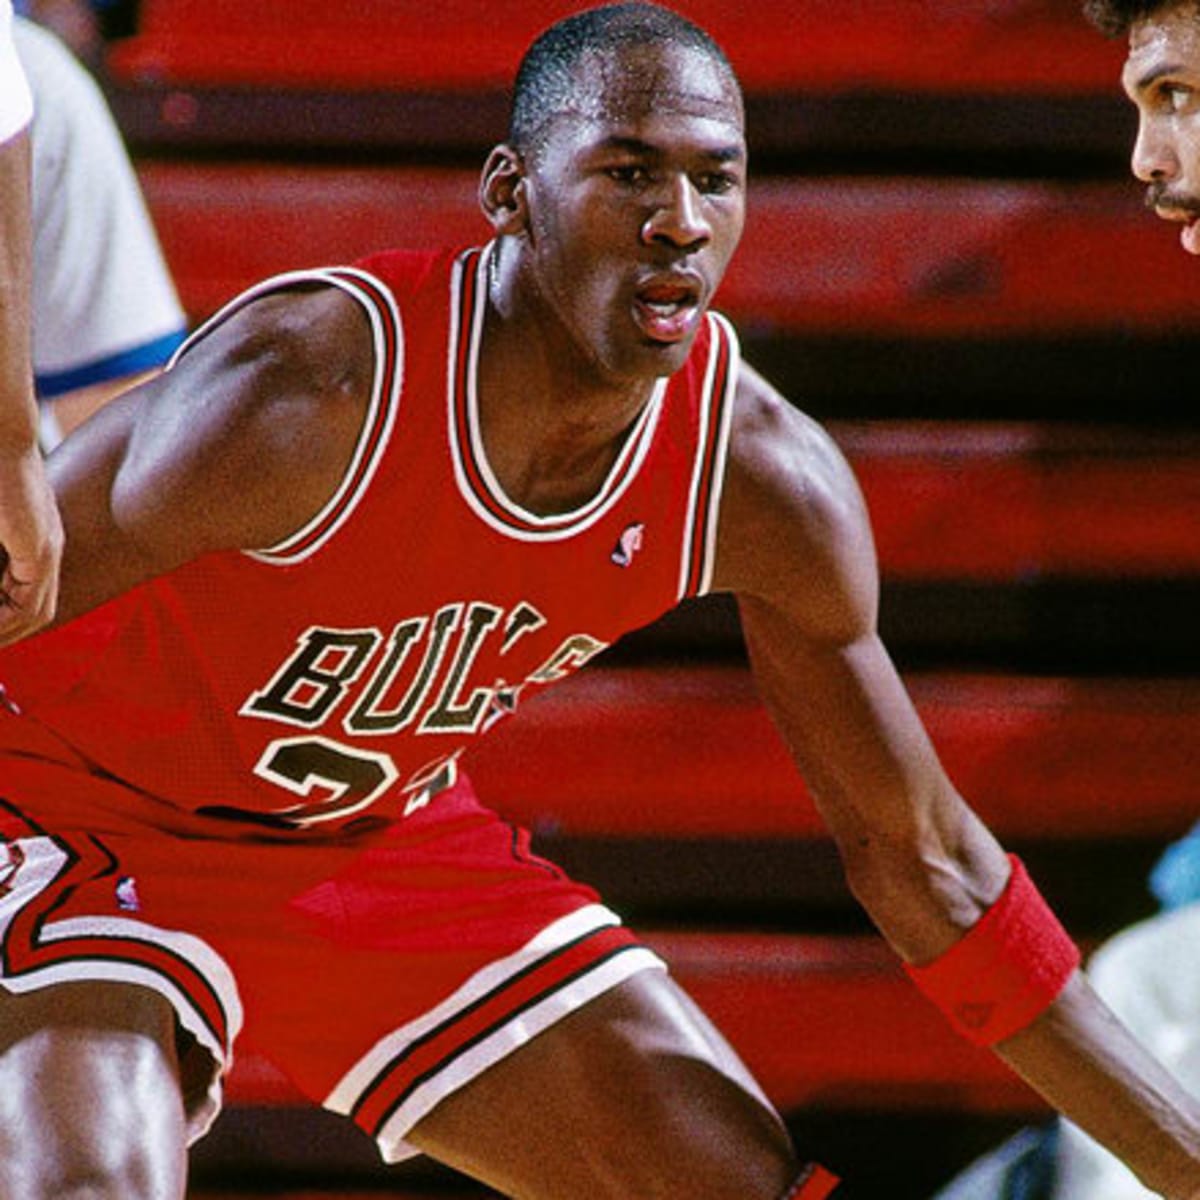 MJ's historic NBA season at the age of 23 - Basketball Network - Your daily dose of basketball